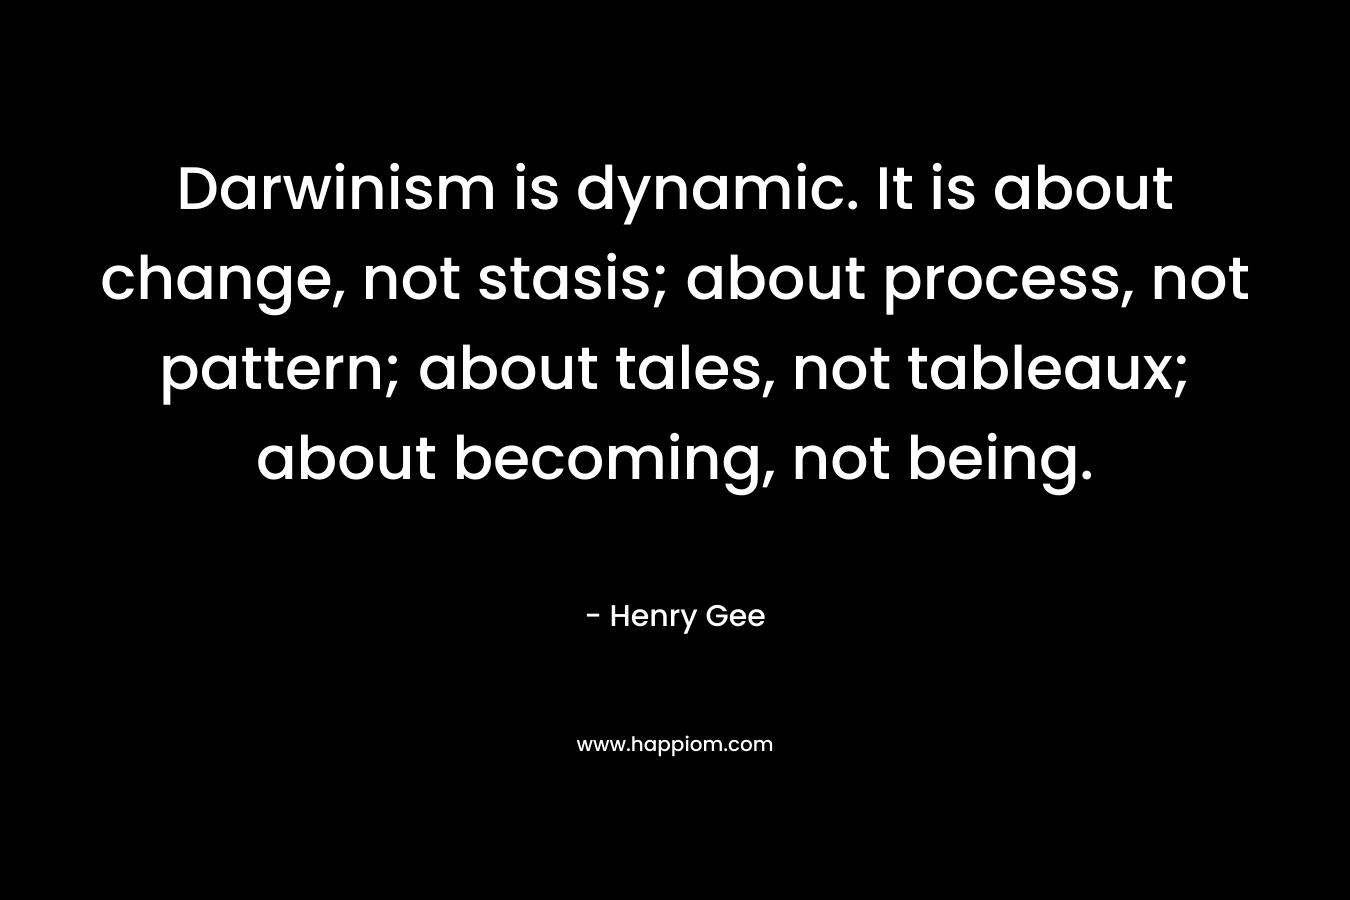 Darwinism is dynamic. It is about change, not stasis; about process, not pattern; about tales, not tableaux; about becoming, not being. – Henry Gee